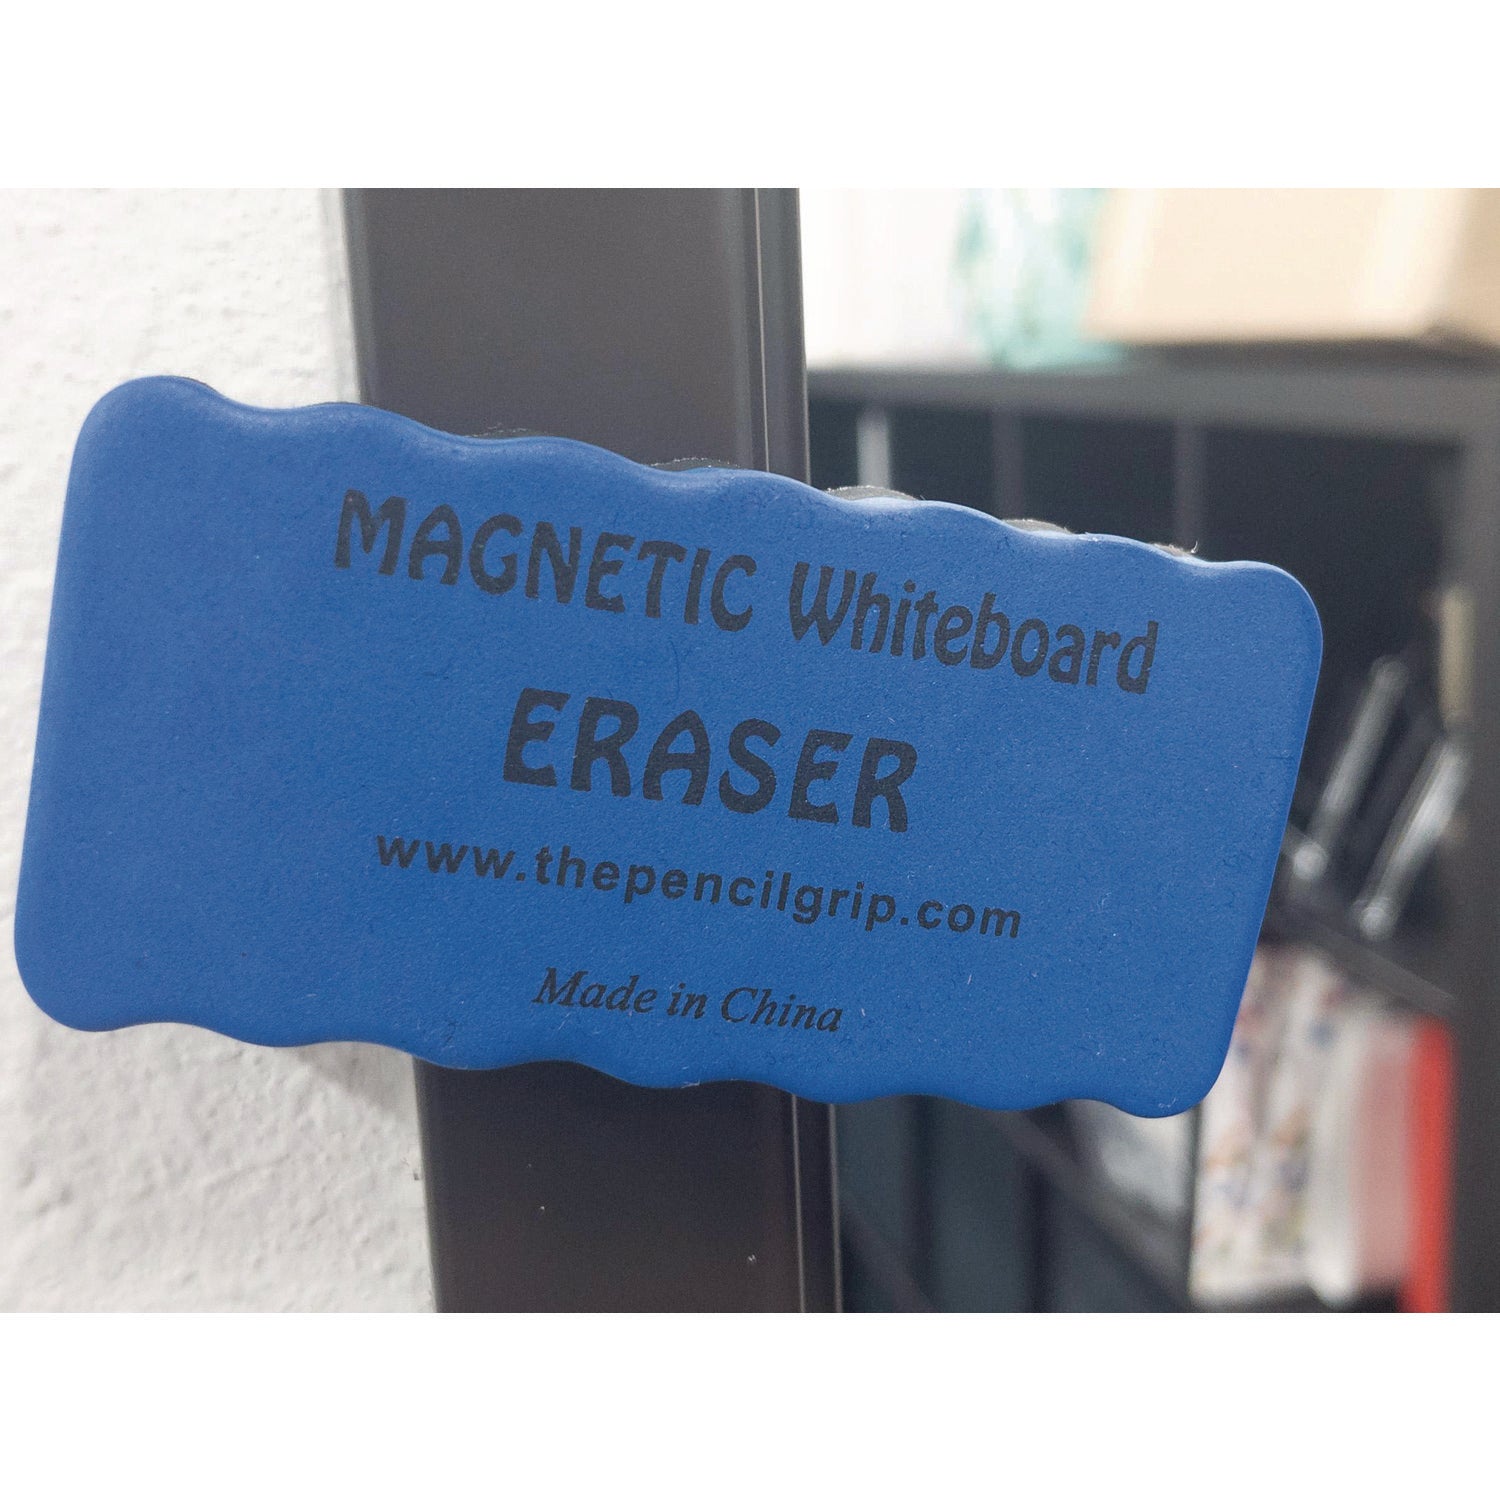 The Pencil Grip Magnetic Whiteboard Eraser Class Pack - 2" Width x 4" Length - Used as Ink Remover, Dirt Remover, Mark Remover - Magnetic, Comfortable Grip, Ergonomic Design - Blue, Black - 24 / Box - 3